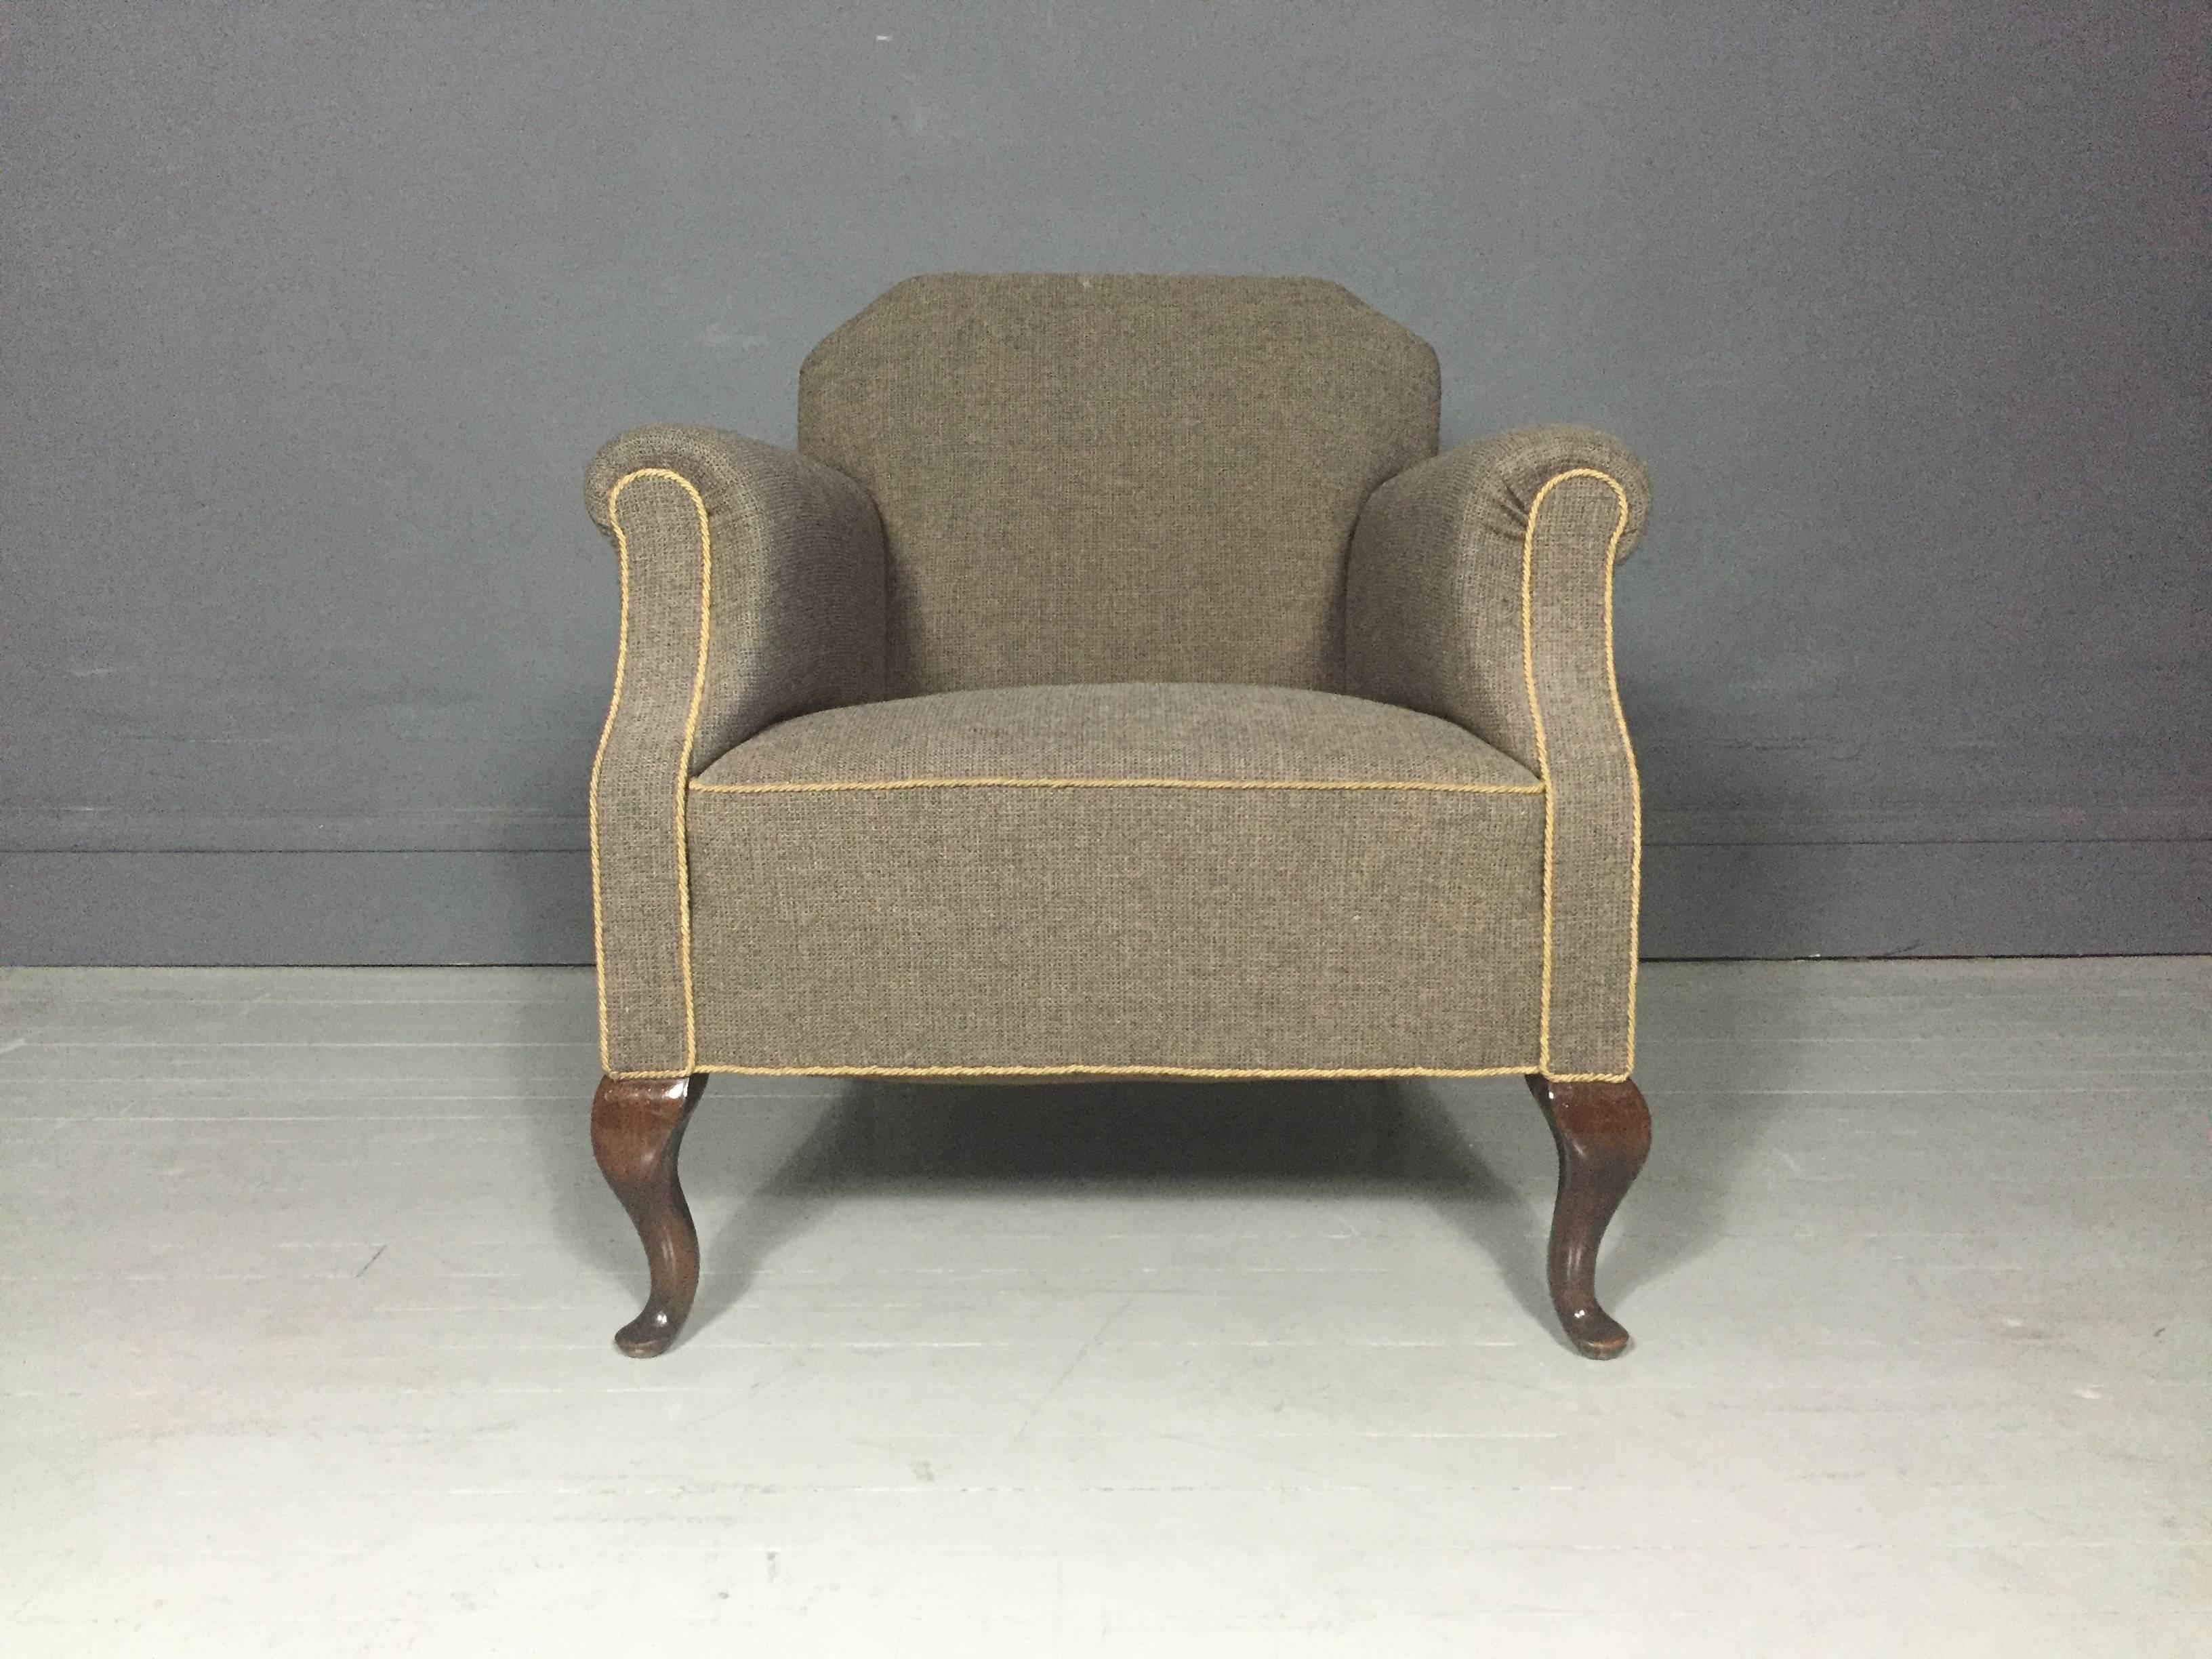 A beautifully proportioned library or armchair with newer brown tweed wool upholstery and contrasting trim, front legs in the Queen Anne foot pad or cabriole style, 1940s, likely English. Excellent condition.